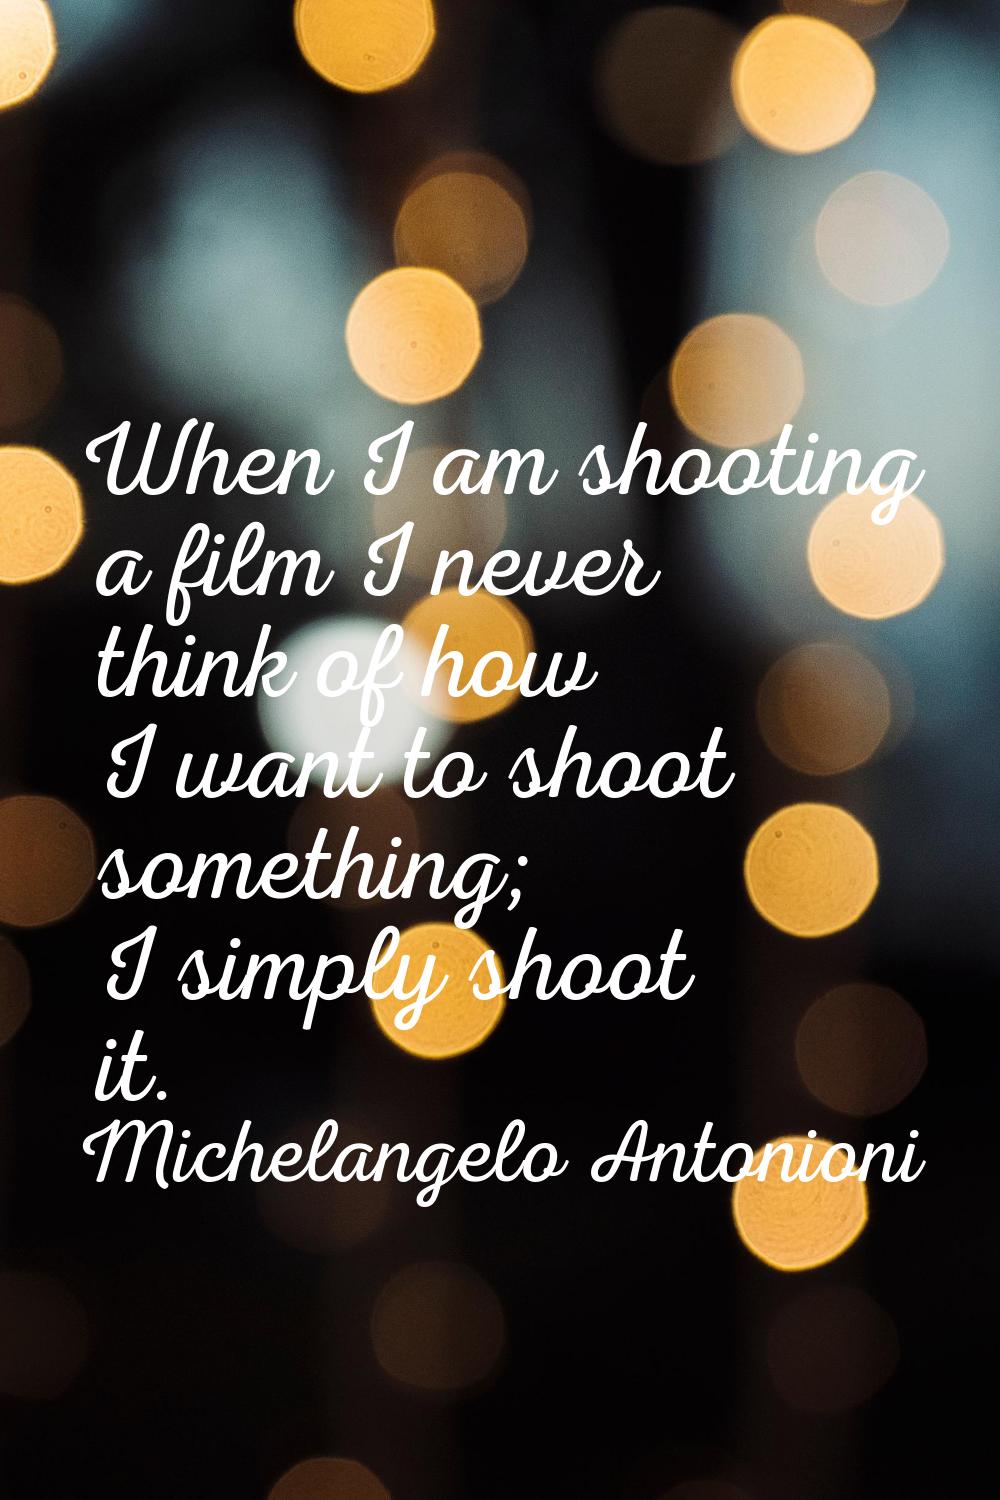 When I am shooting a film I never think of how I want to shoot something; I simply shoot it.